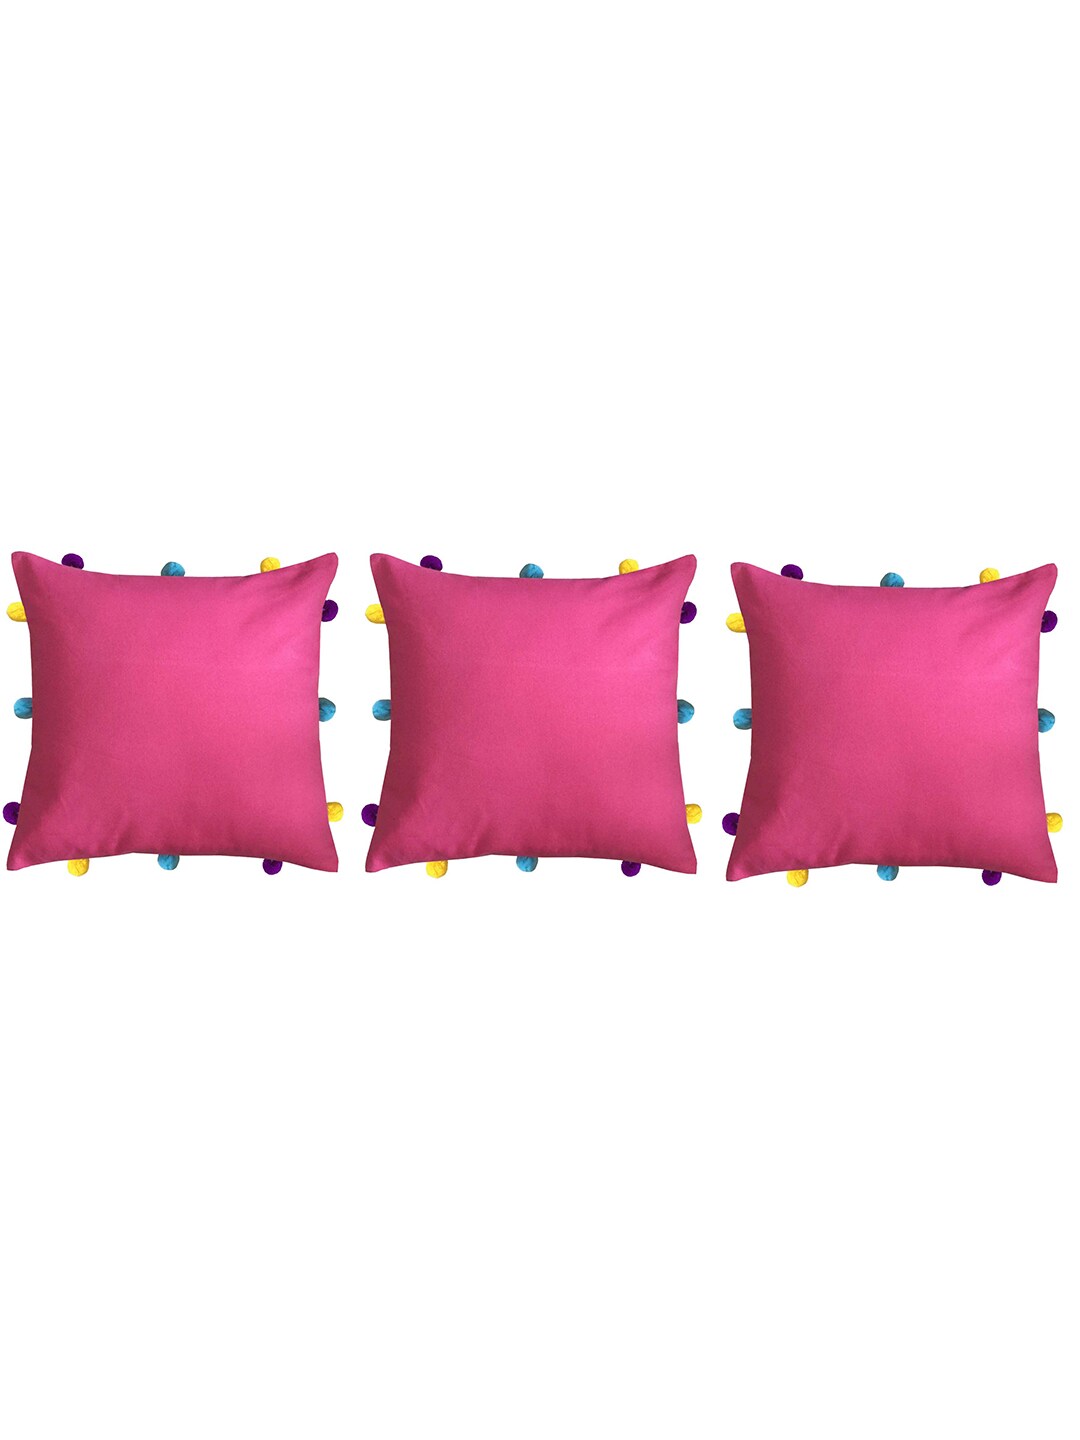 Lushomes Pack Of 3 Pink & Yellow Square Cushion Covers with Colorful Pom Pom Price in India